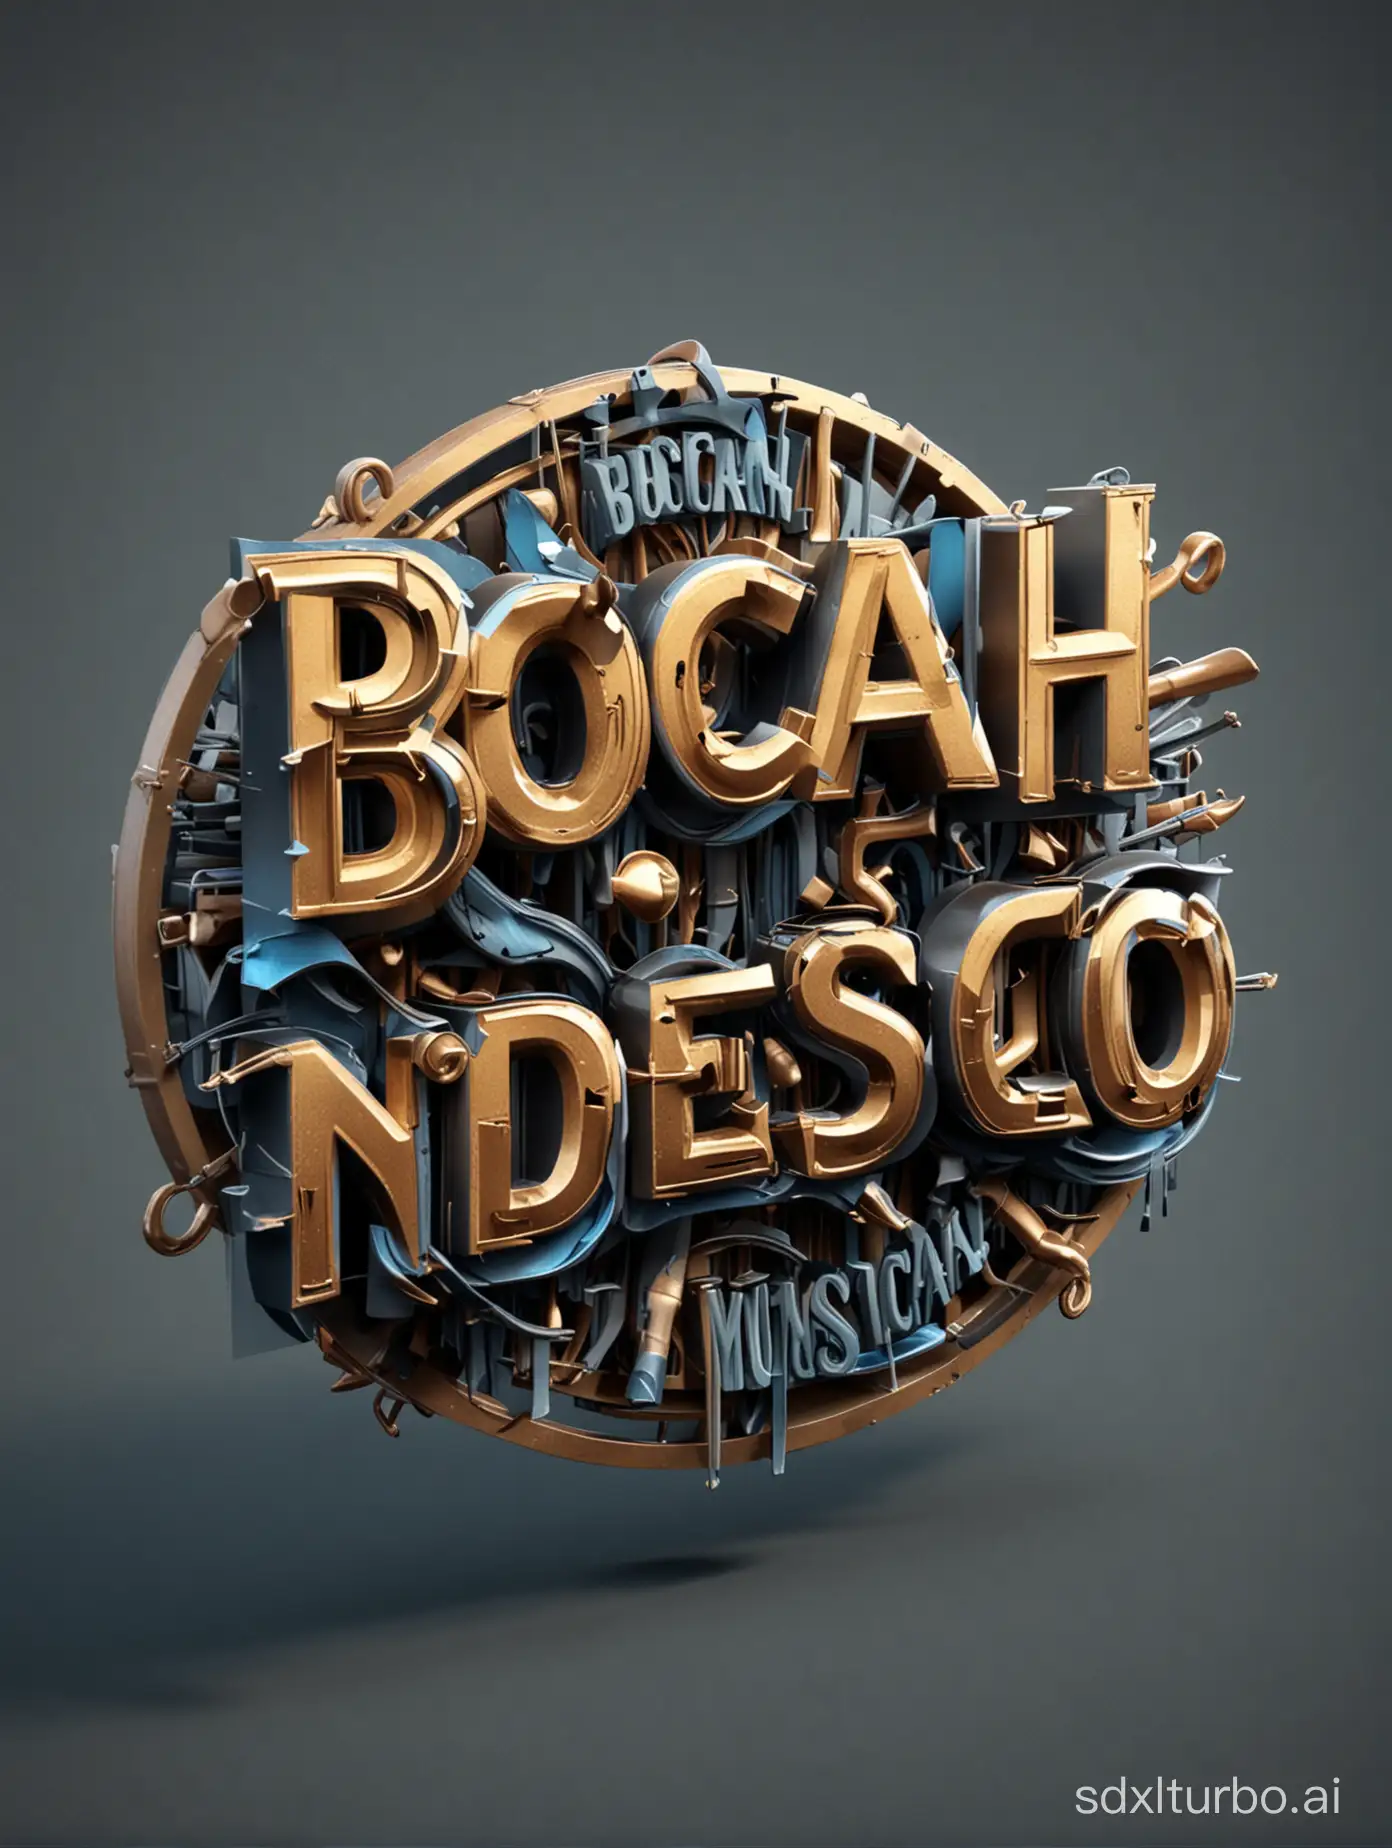 "BOCAH NDESO"  the musical band professional logo in 3d 